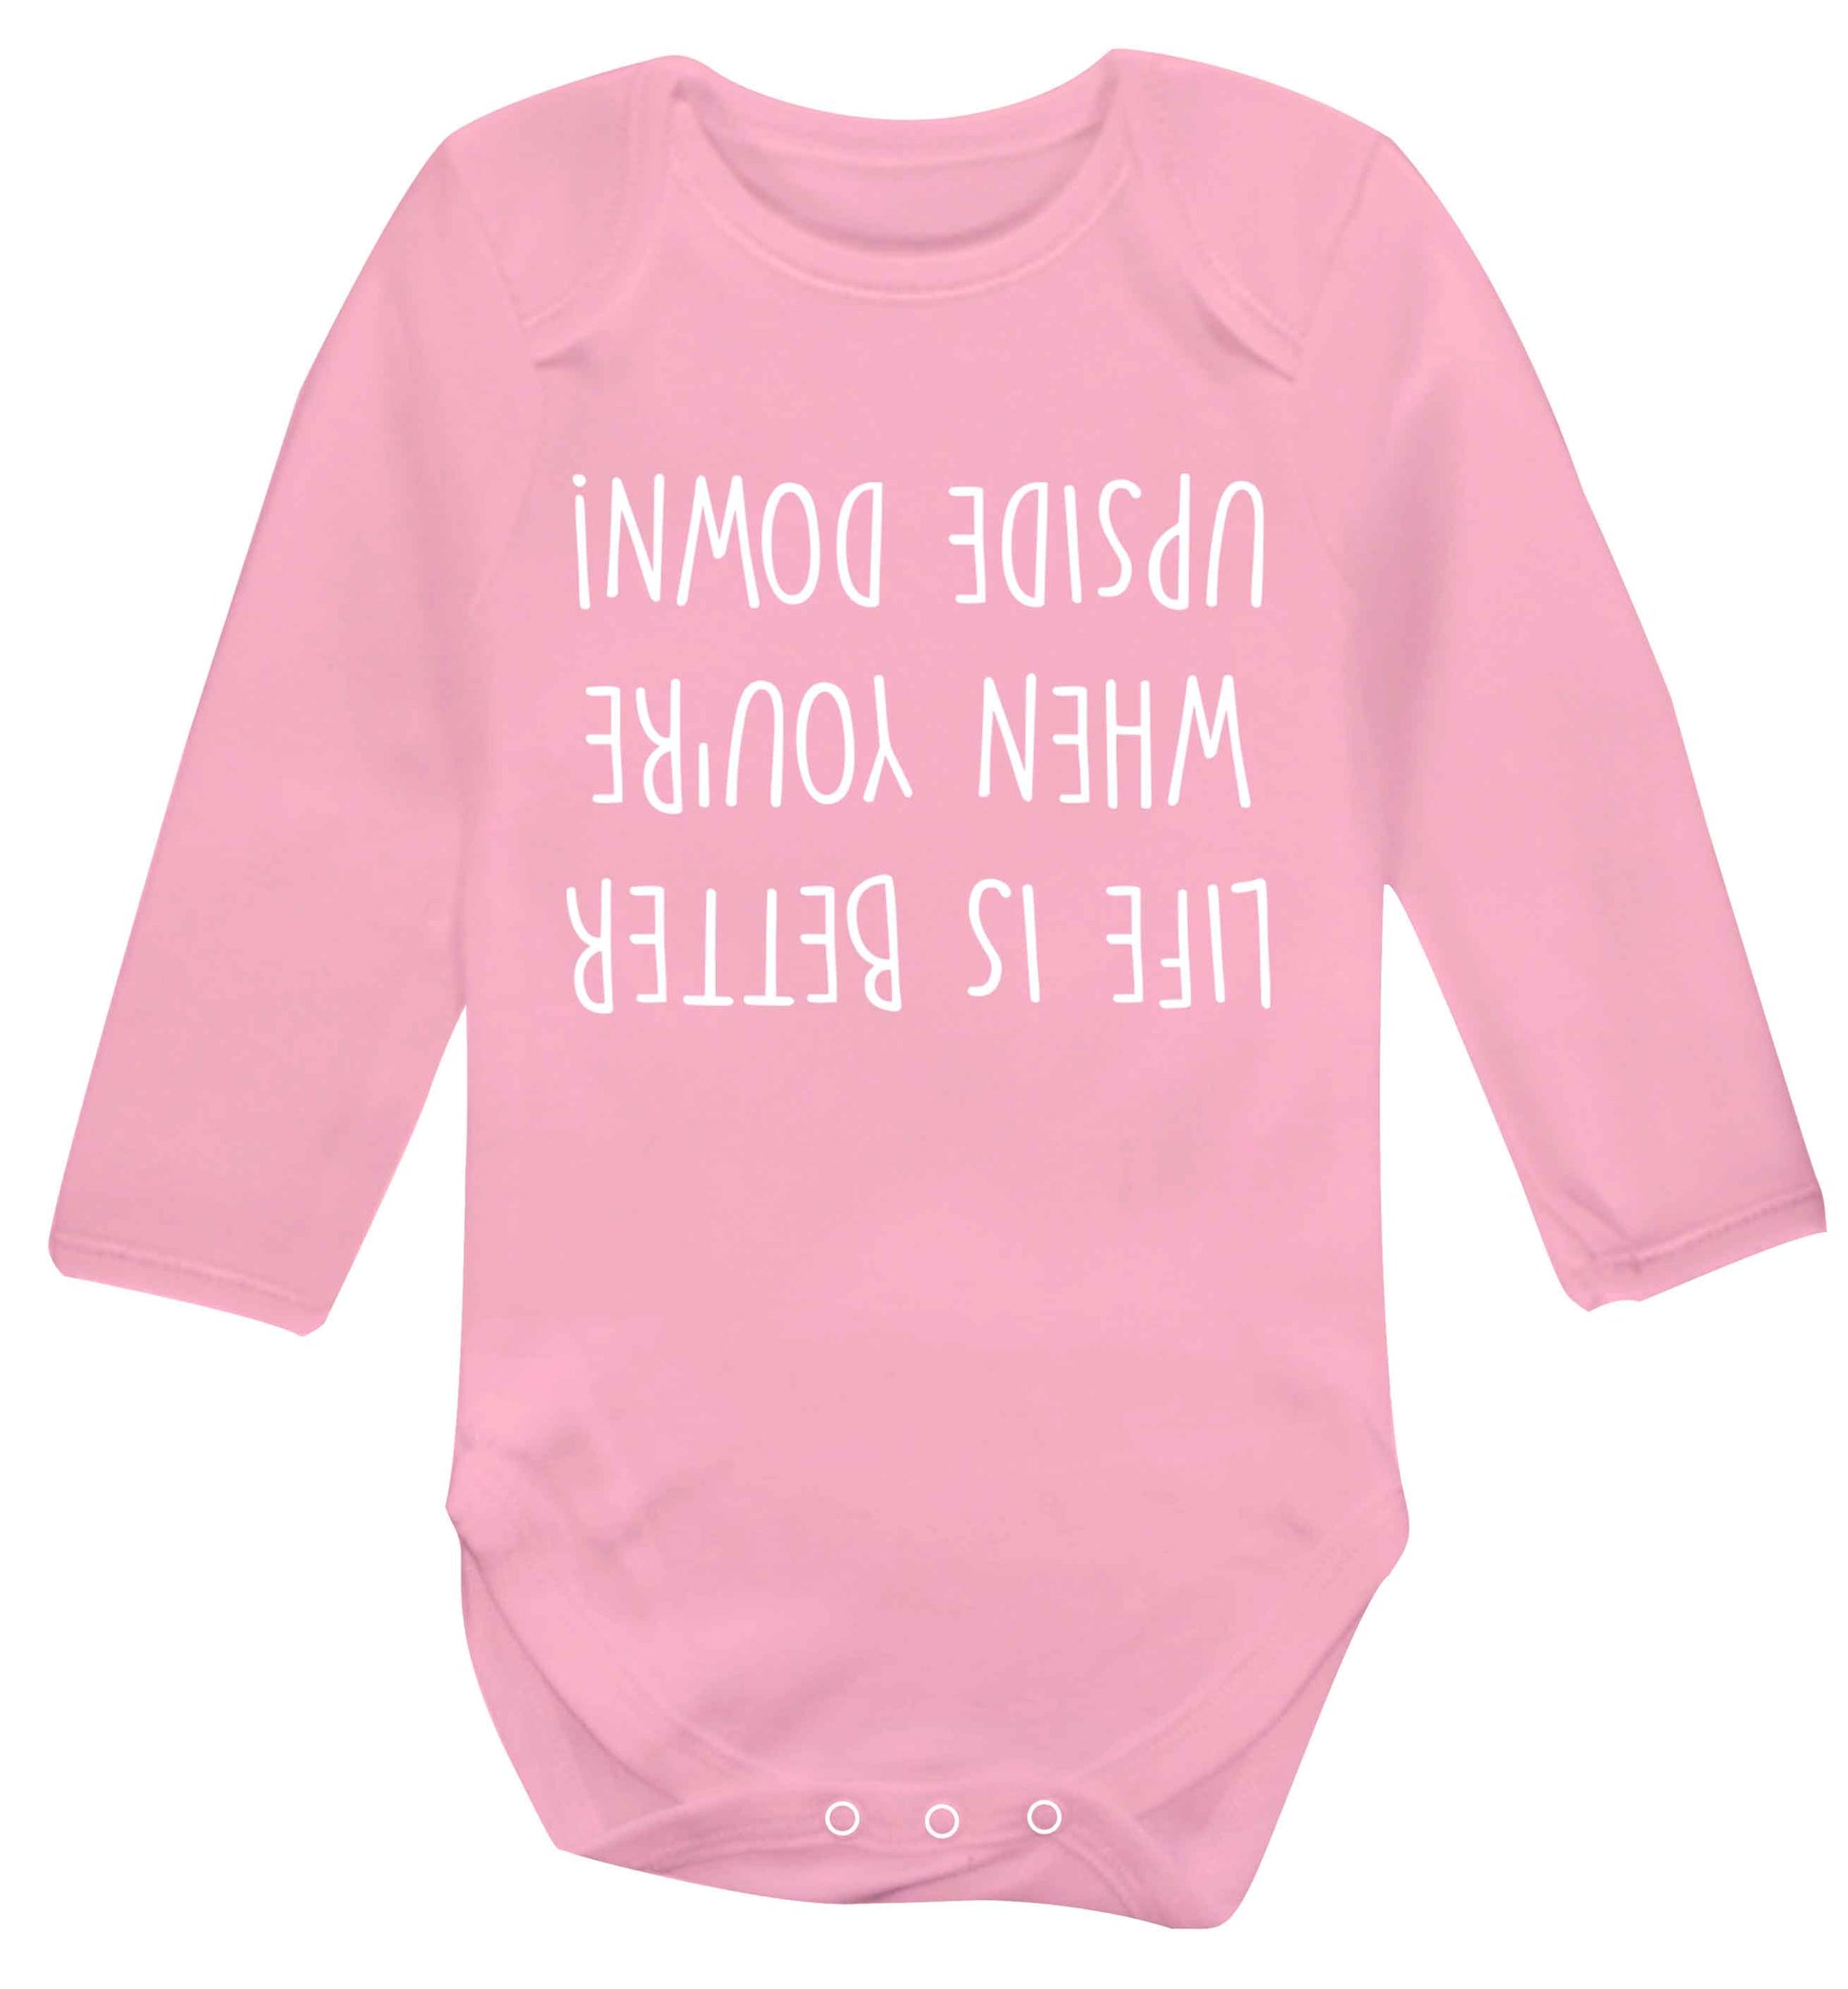 Life is better upside down Baby Vest long sleeved pale pink 6-12 months